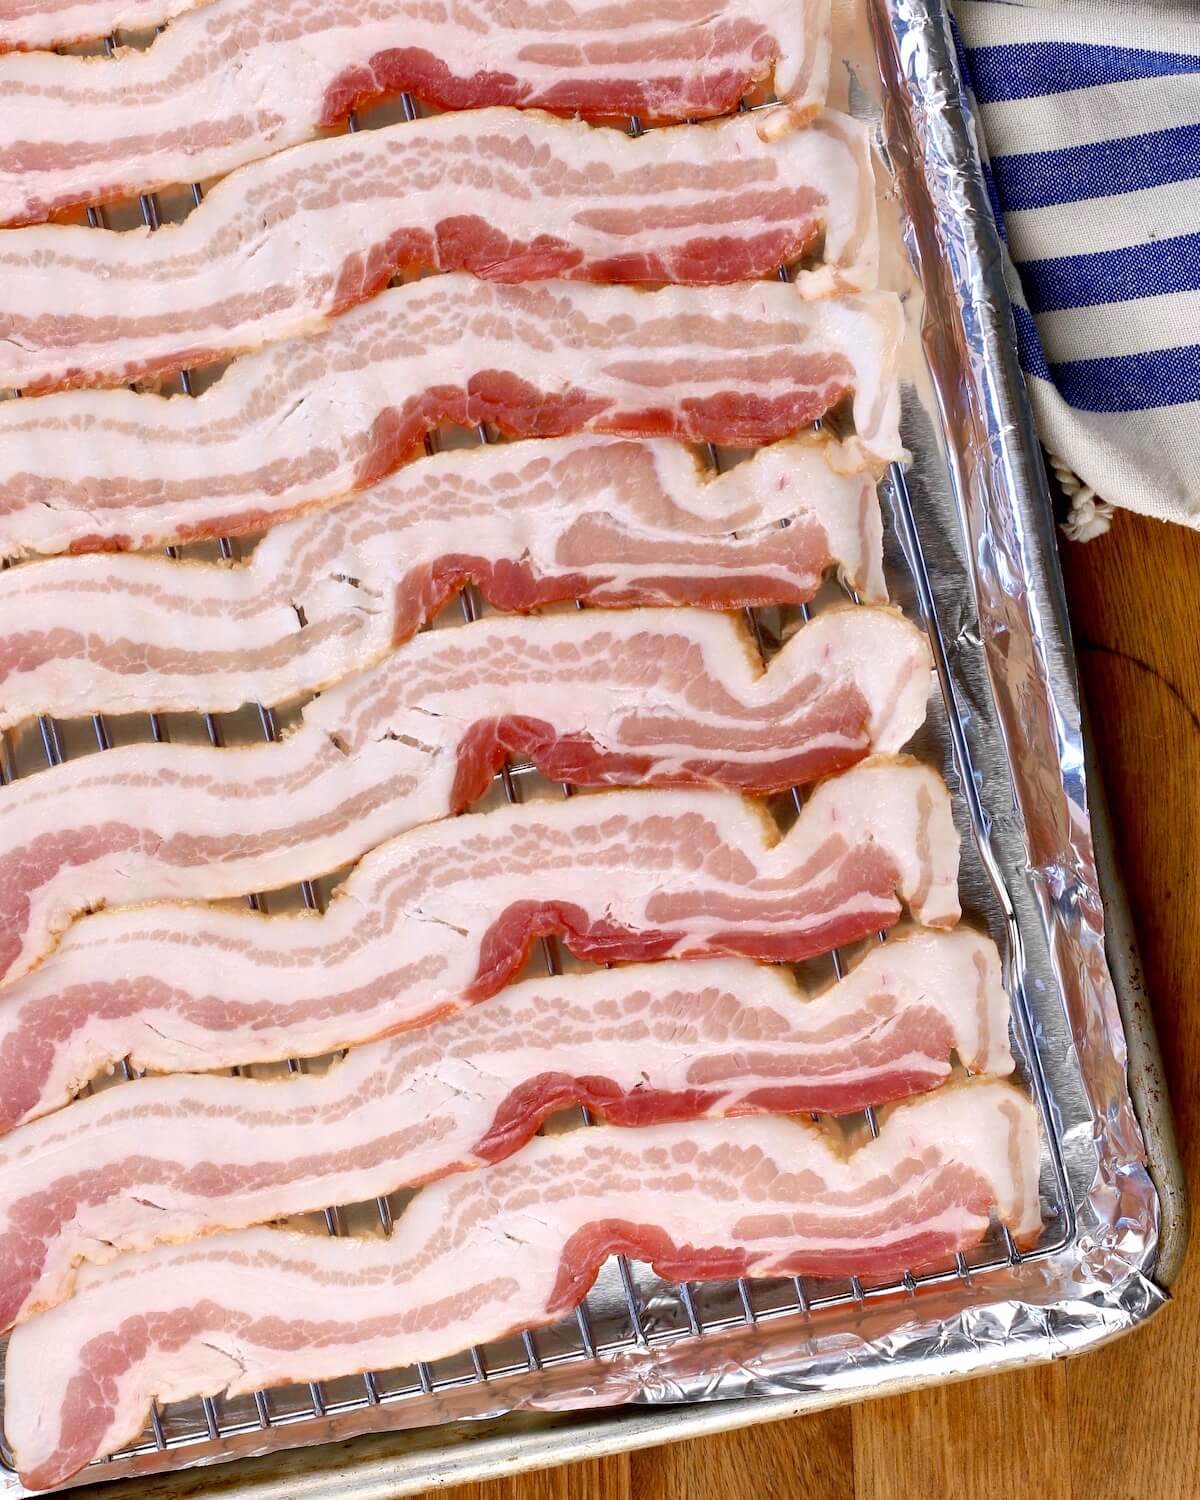 bacon in a pan ready to be cooked